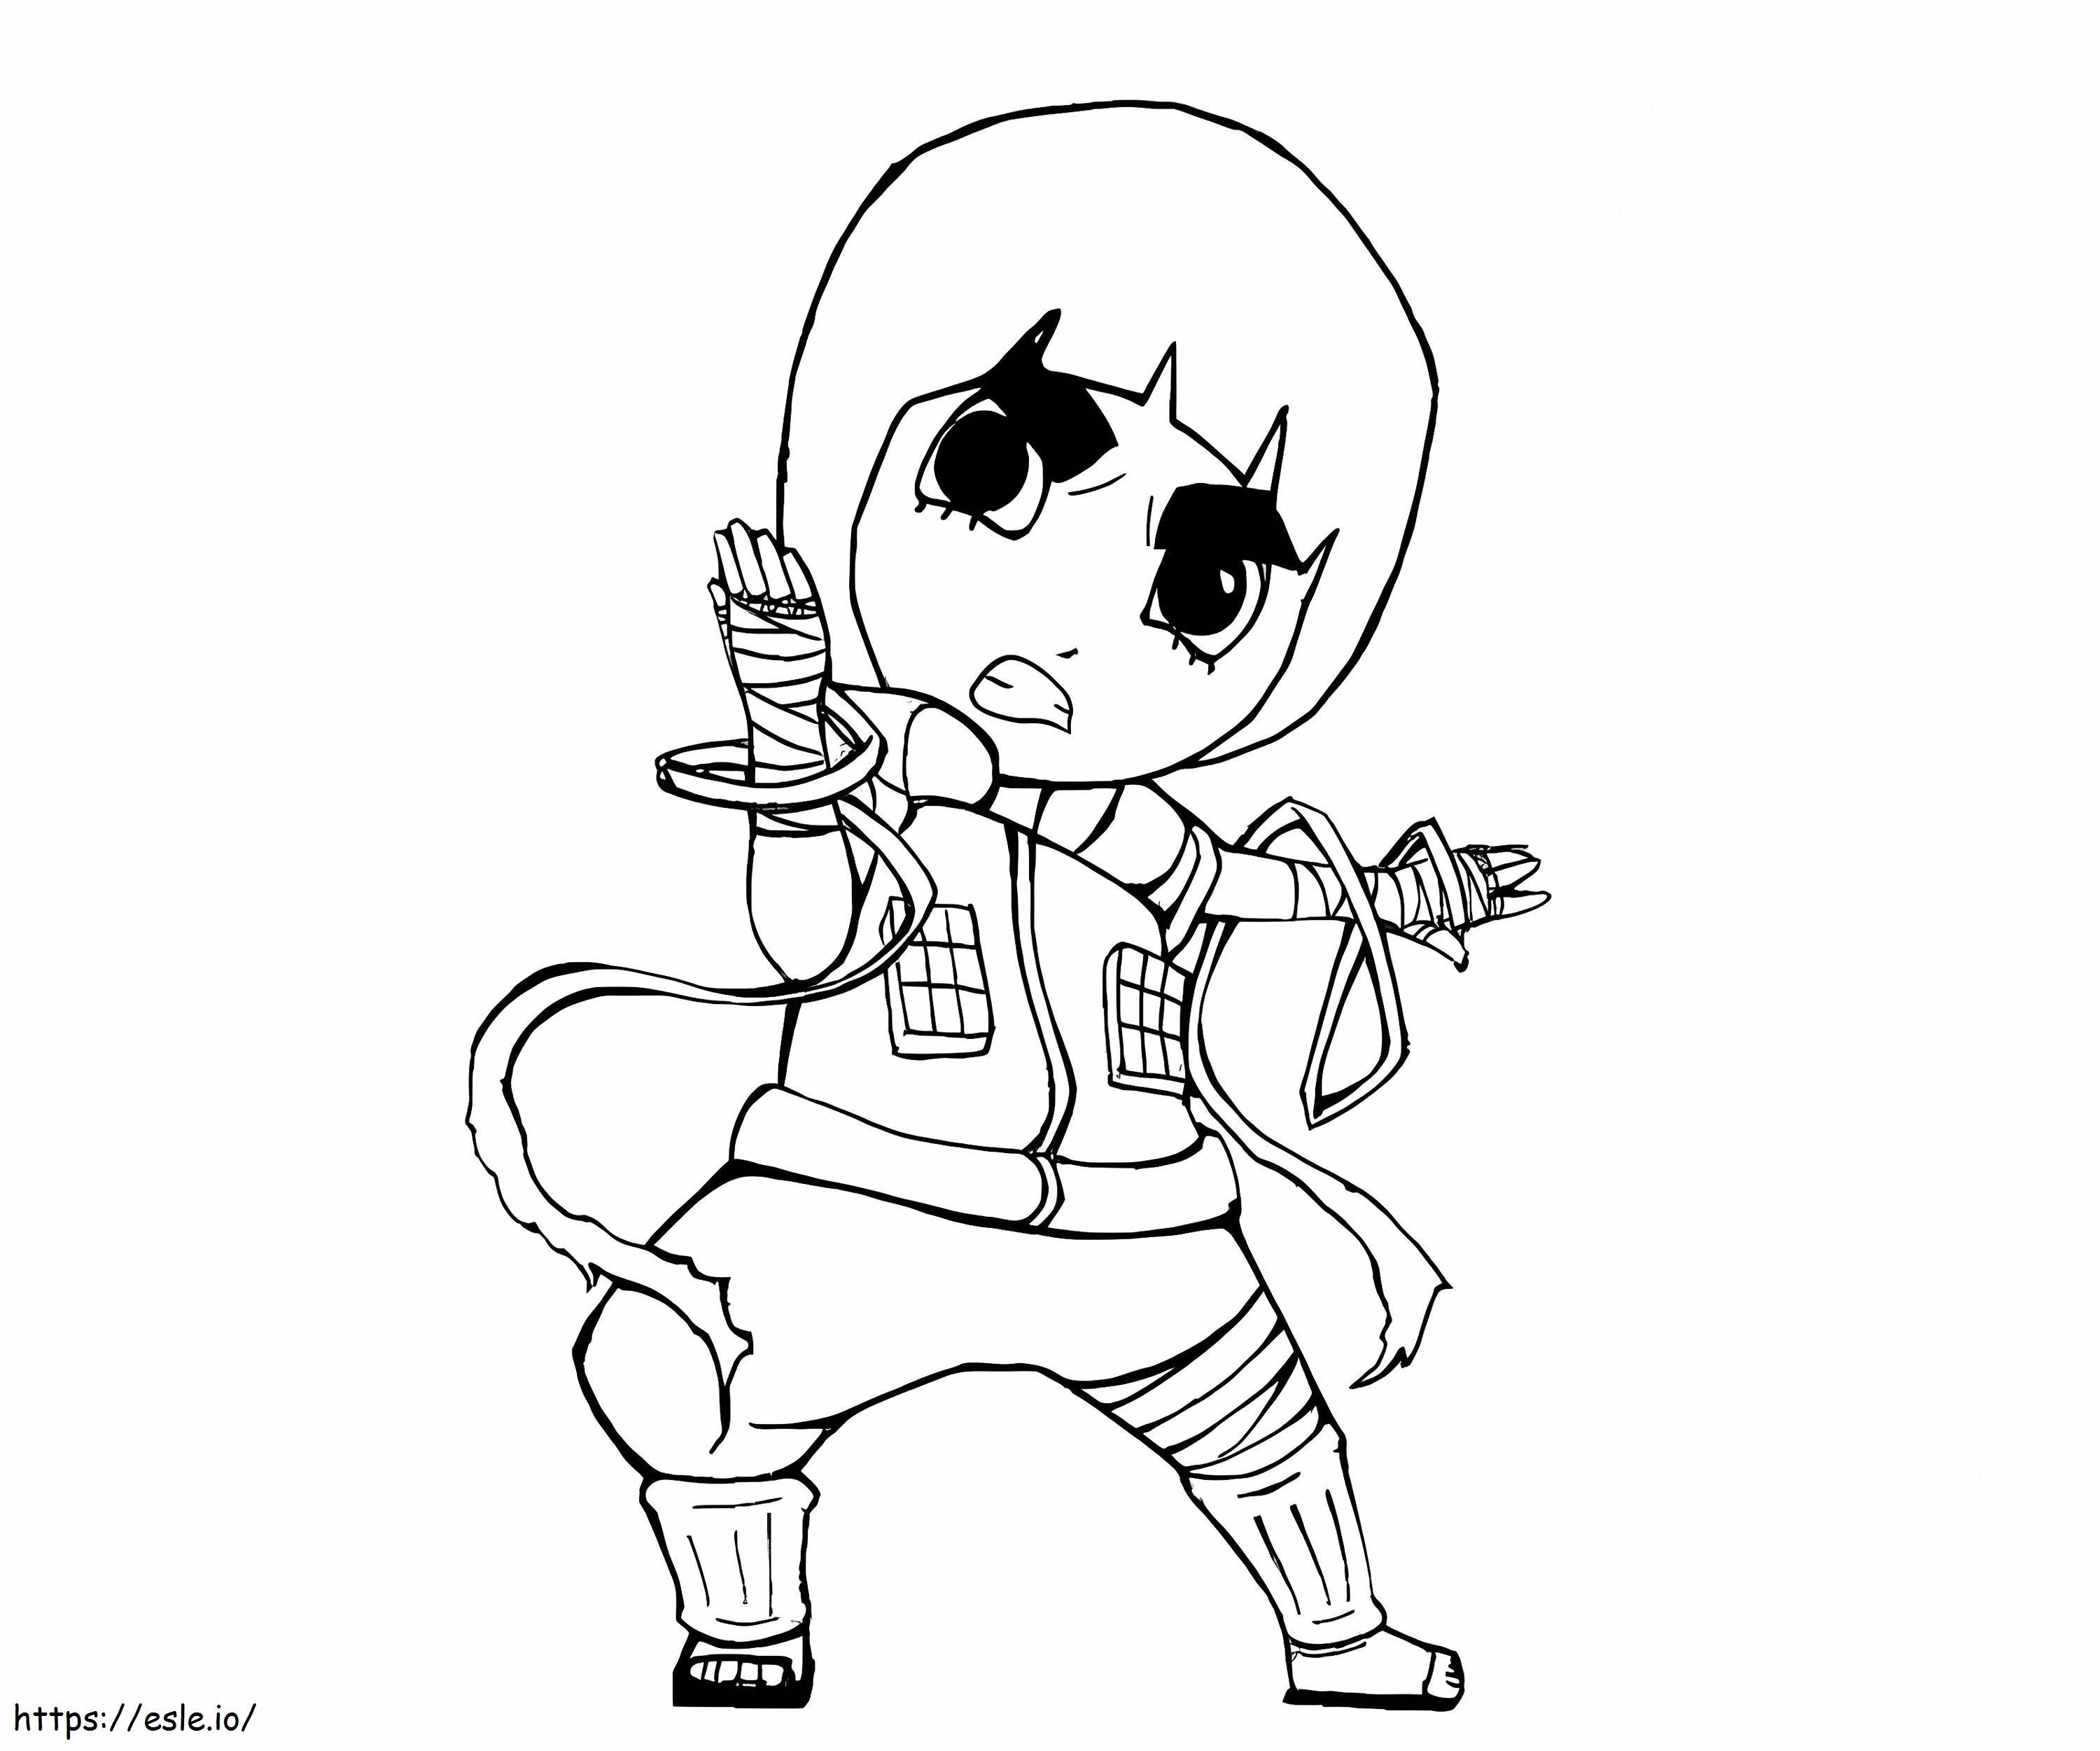 Chibi Rock Lee Angry coloring page